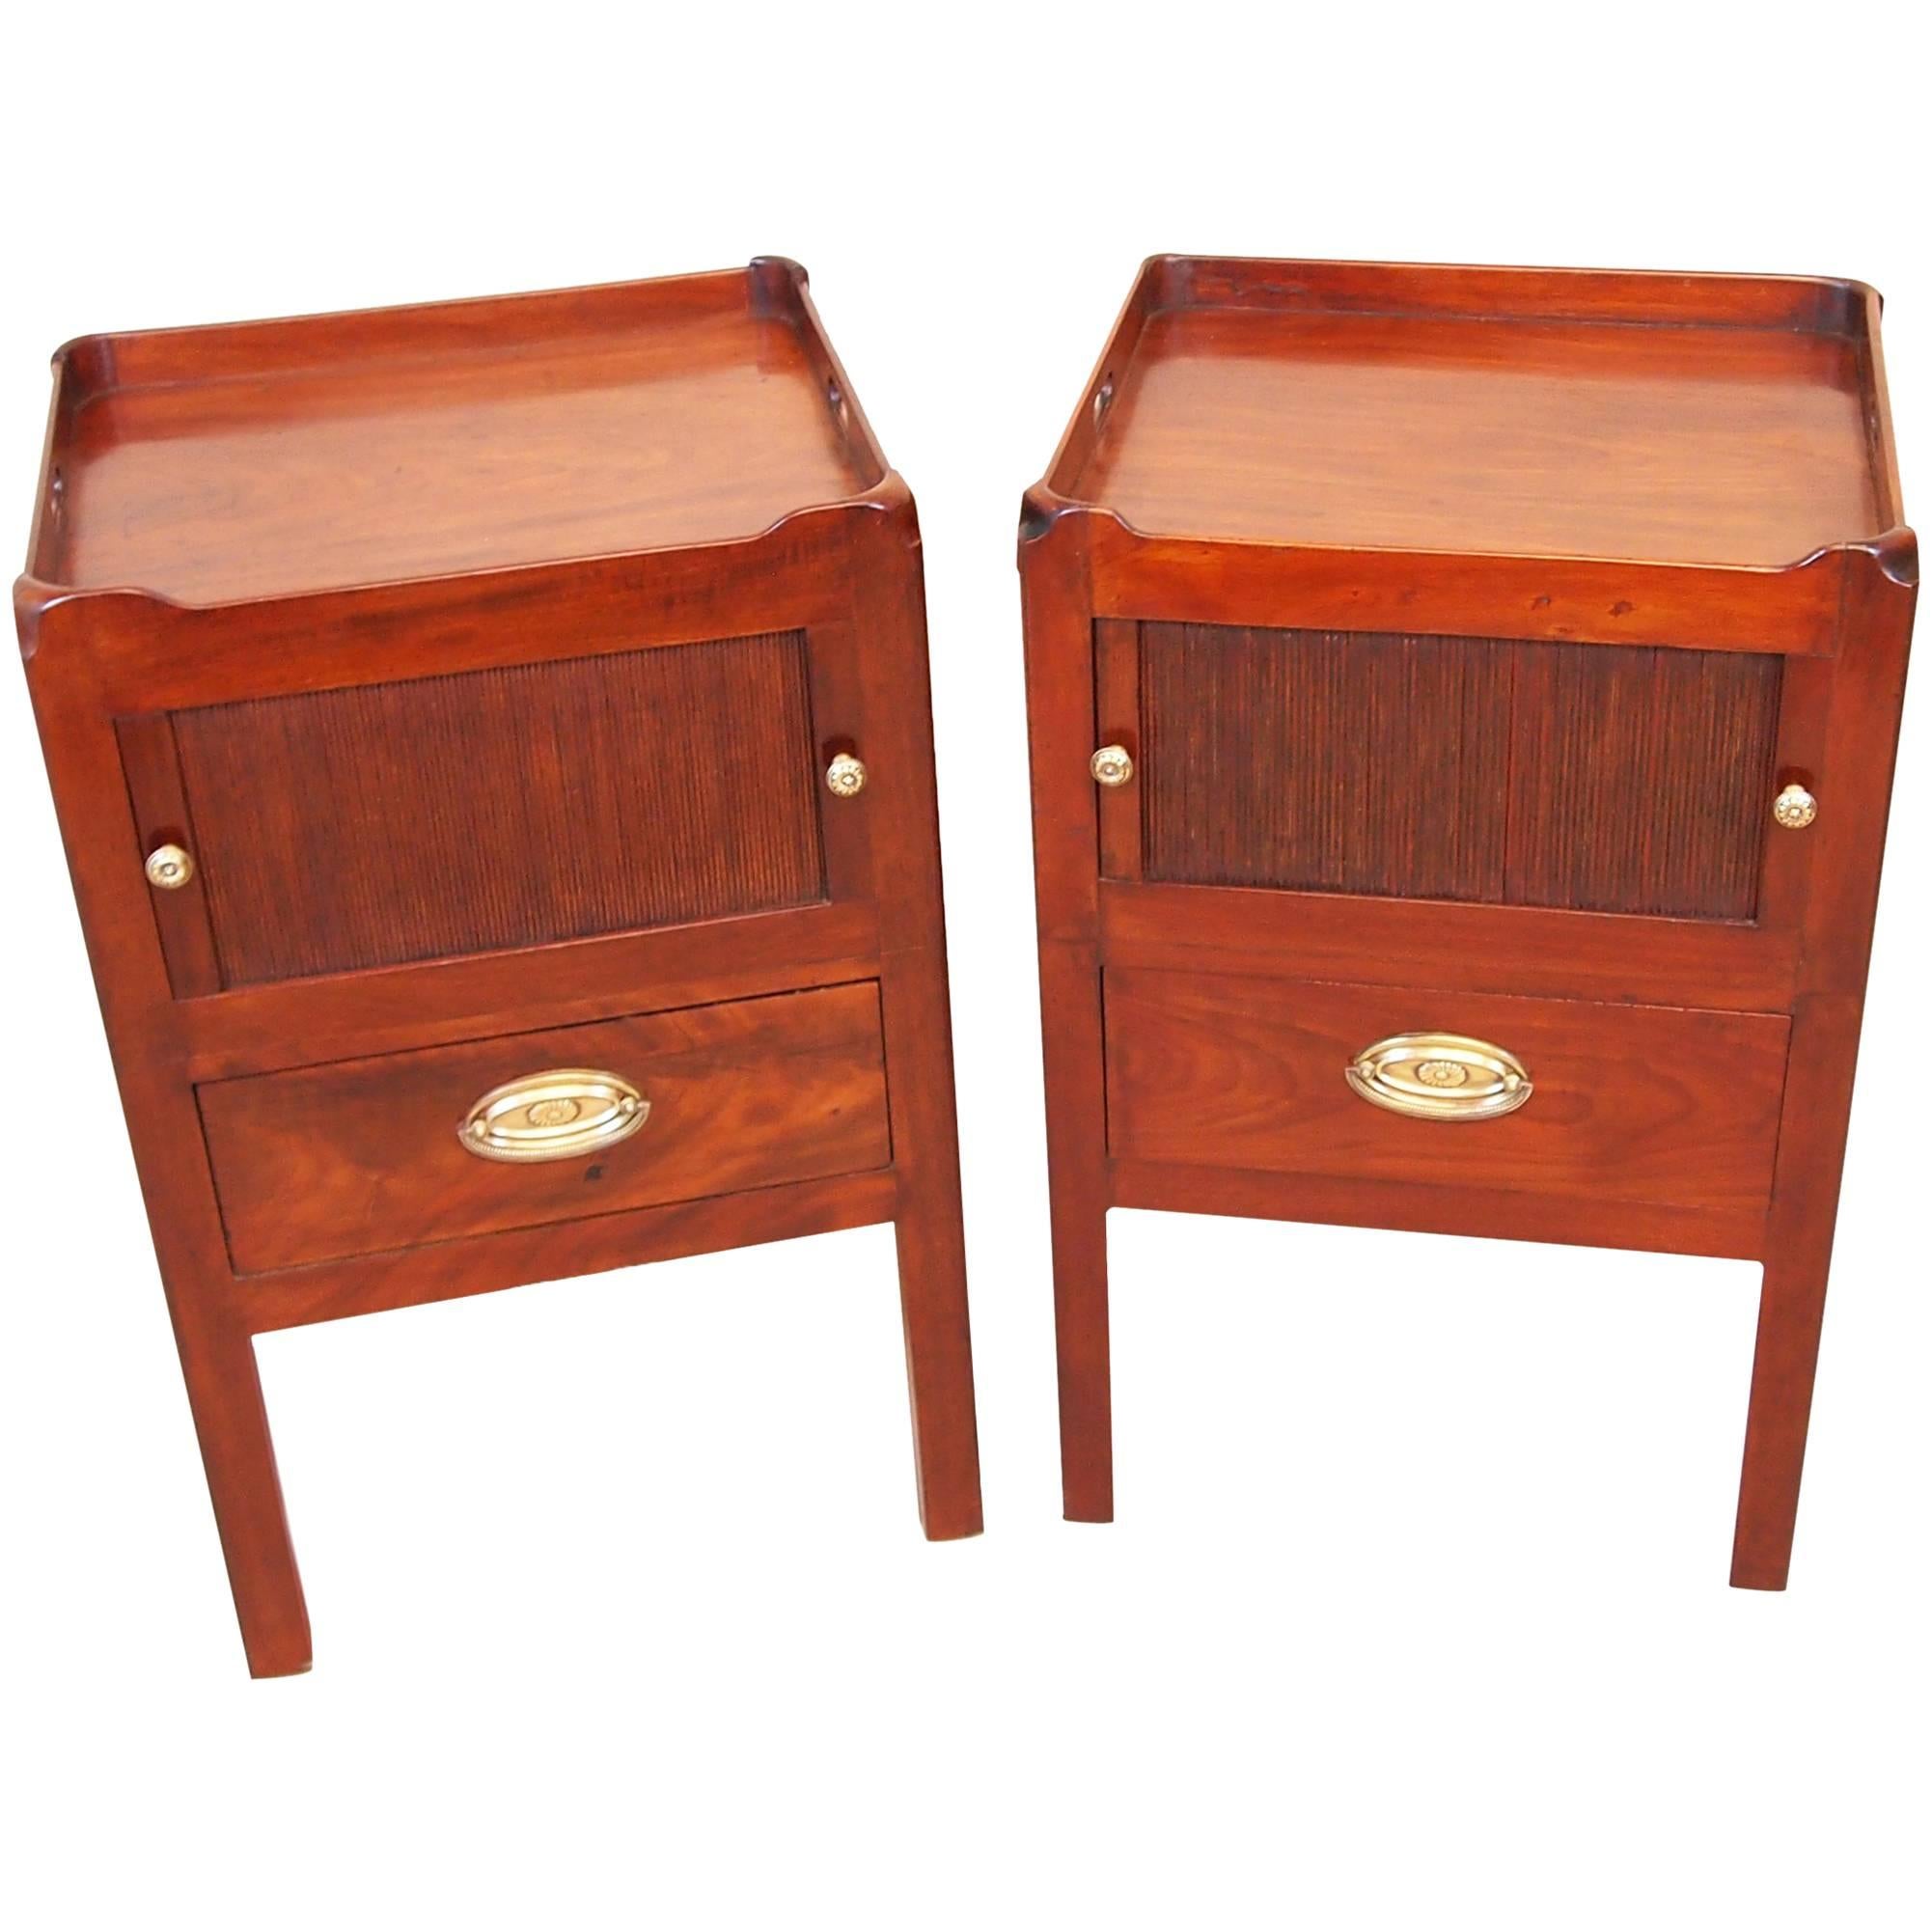 Antique Georgian Pair of Tray Top Commodes or Bedside Tables